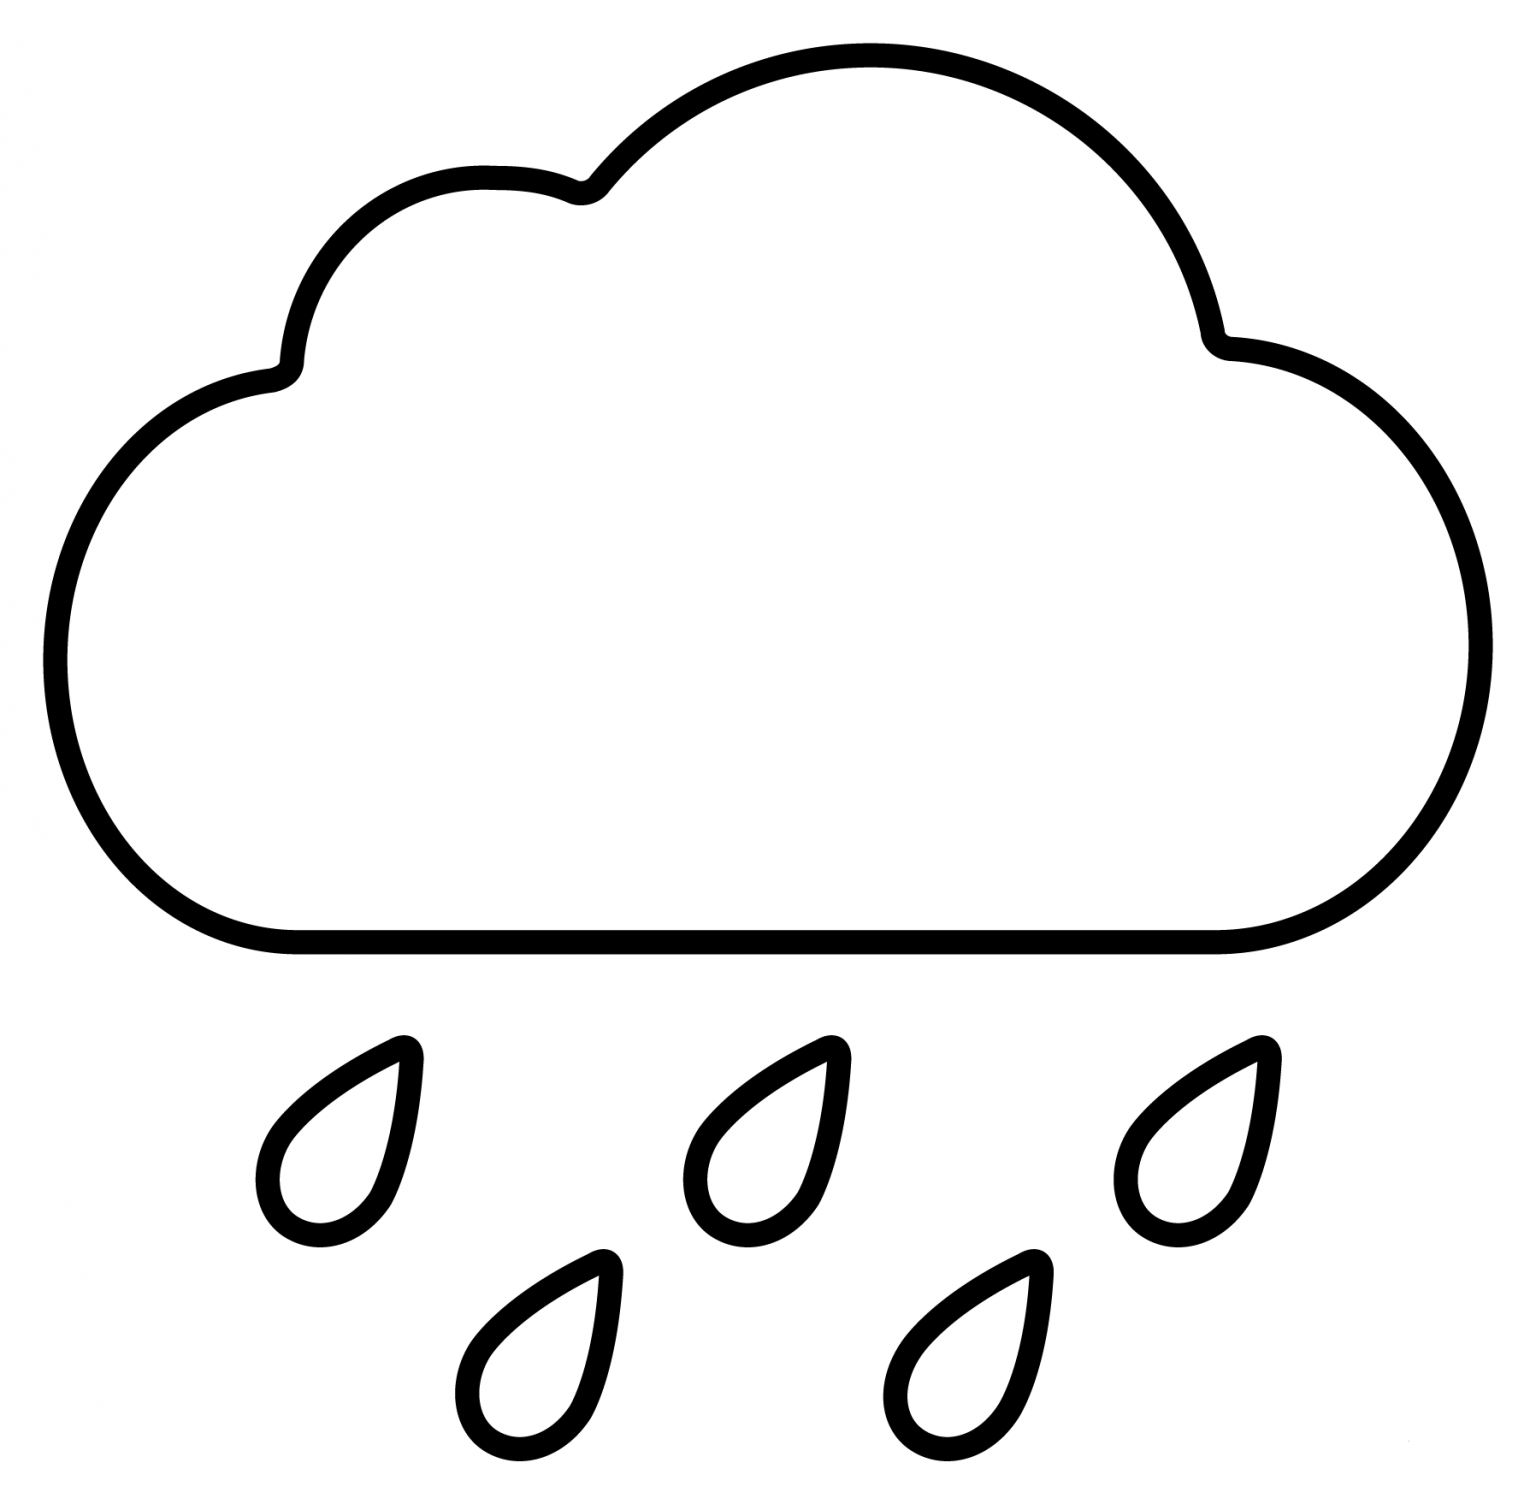 Cloud with Rain Emoji coloring page - ColouringPages